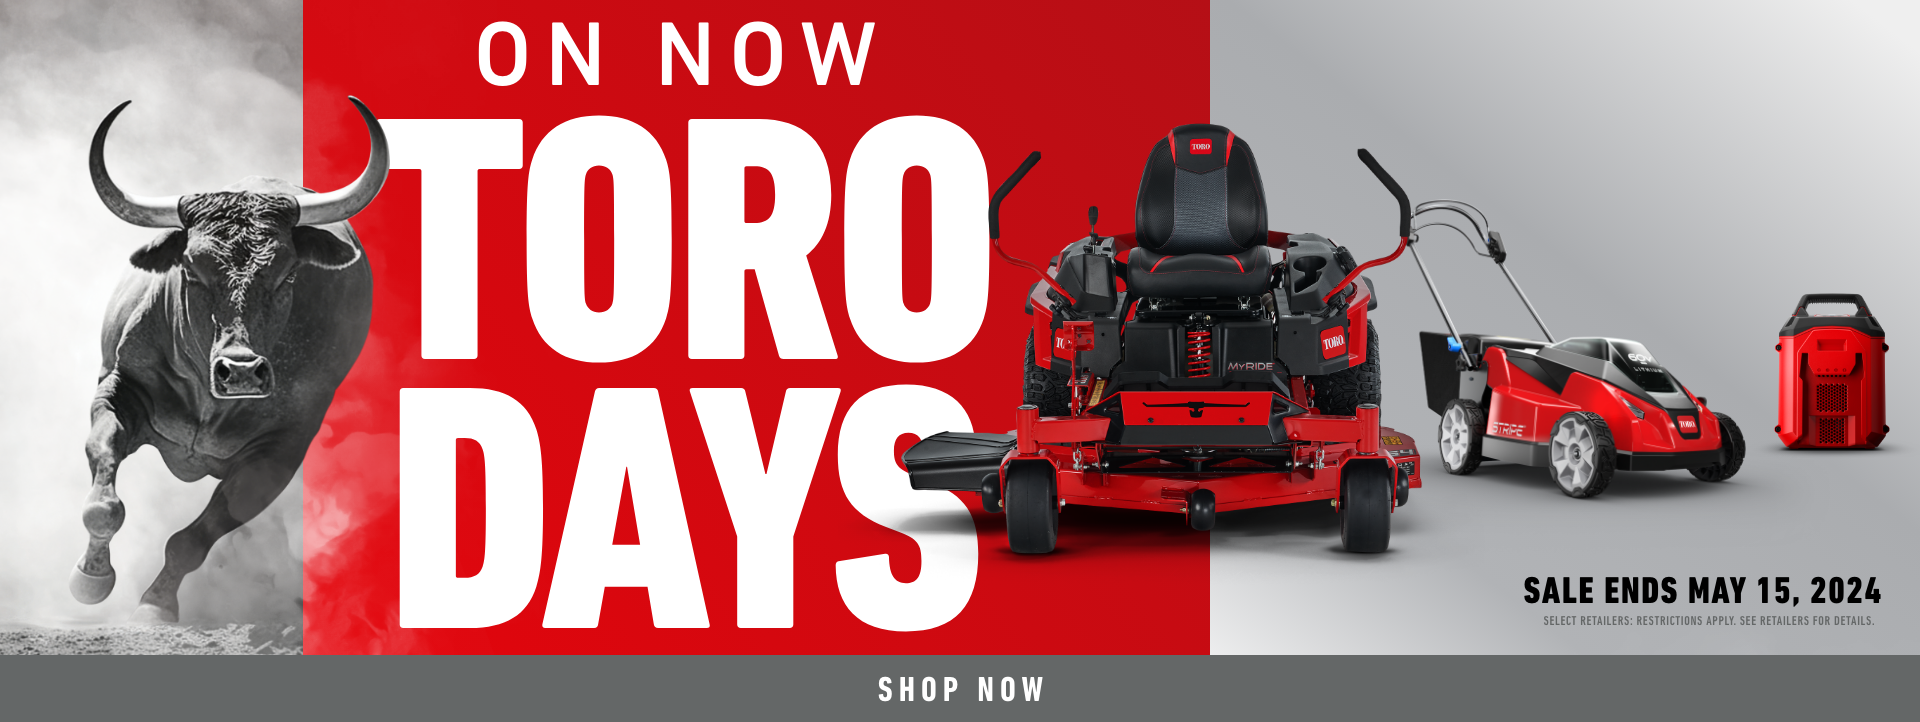 Toro Days - Sale ends May 15, 2024